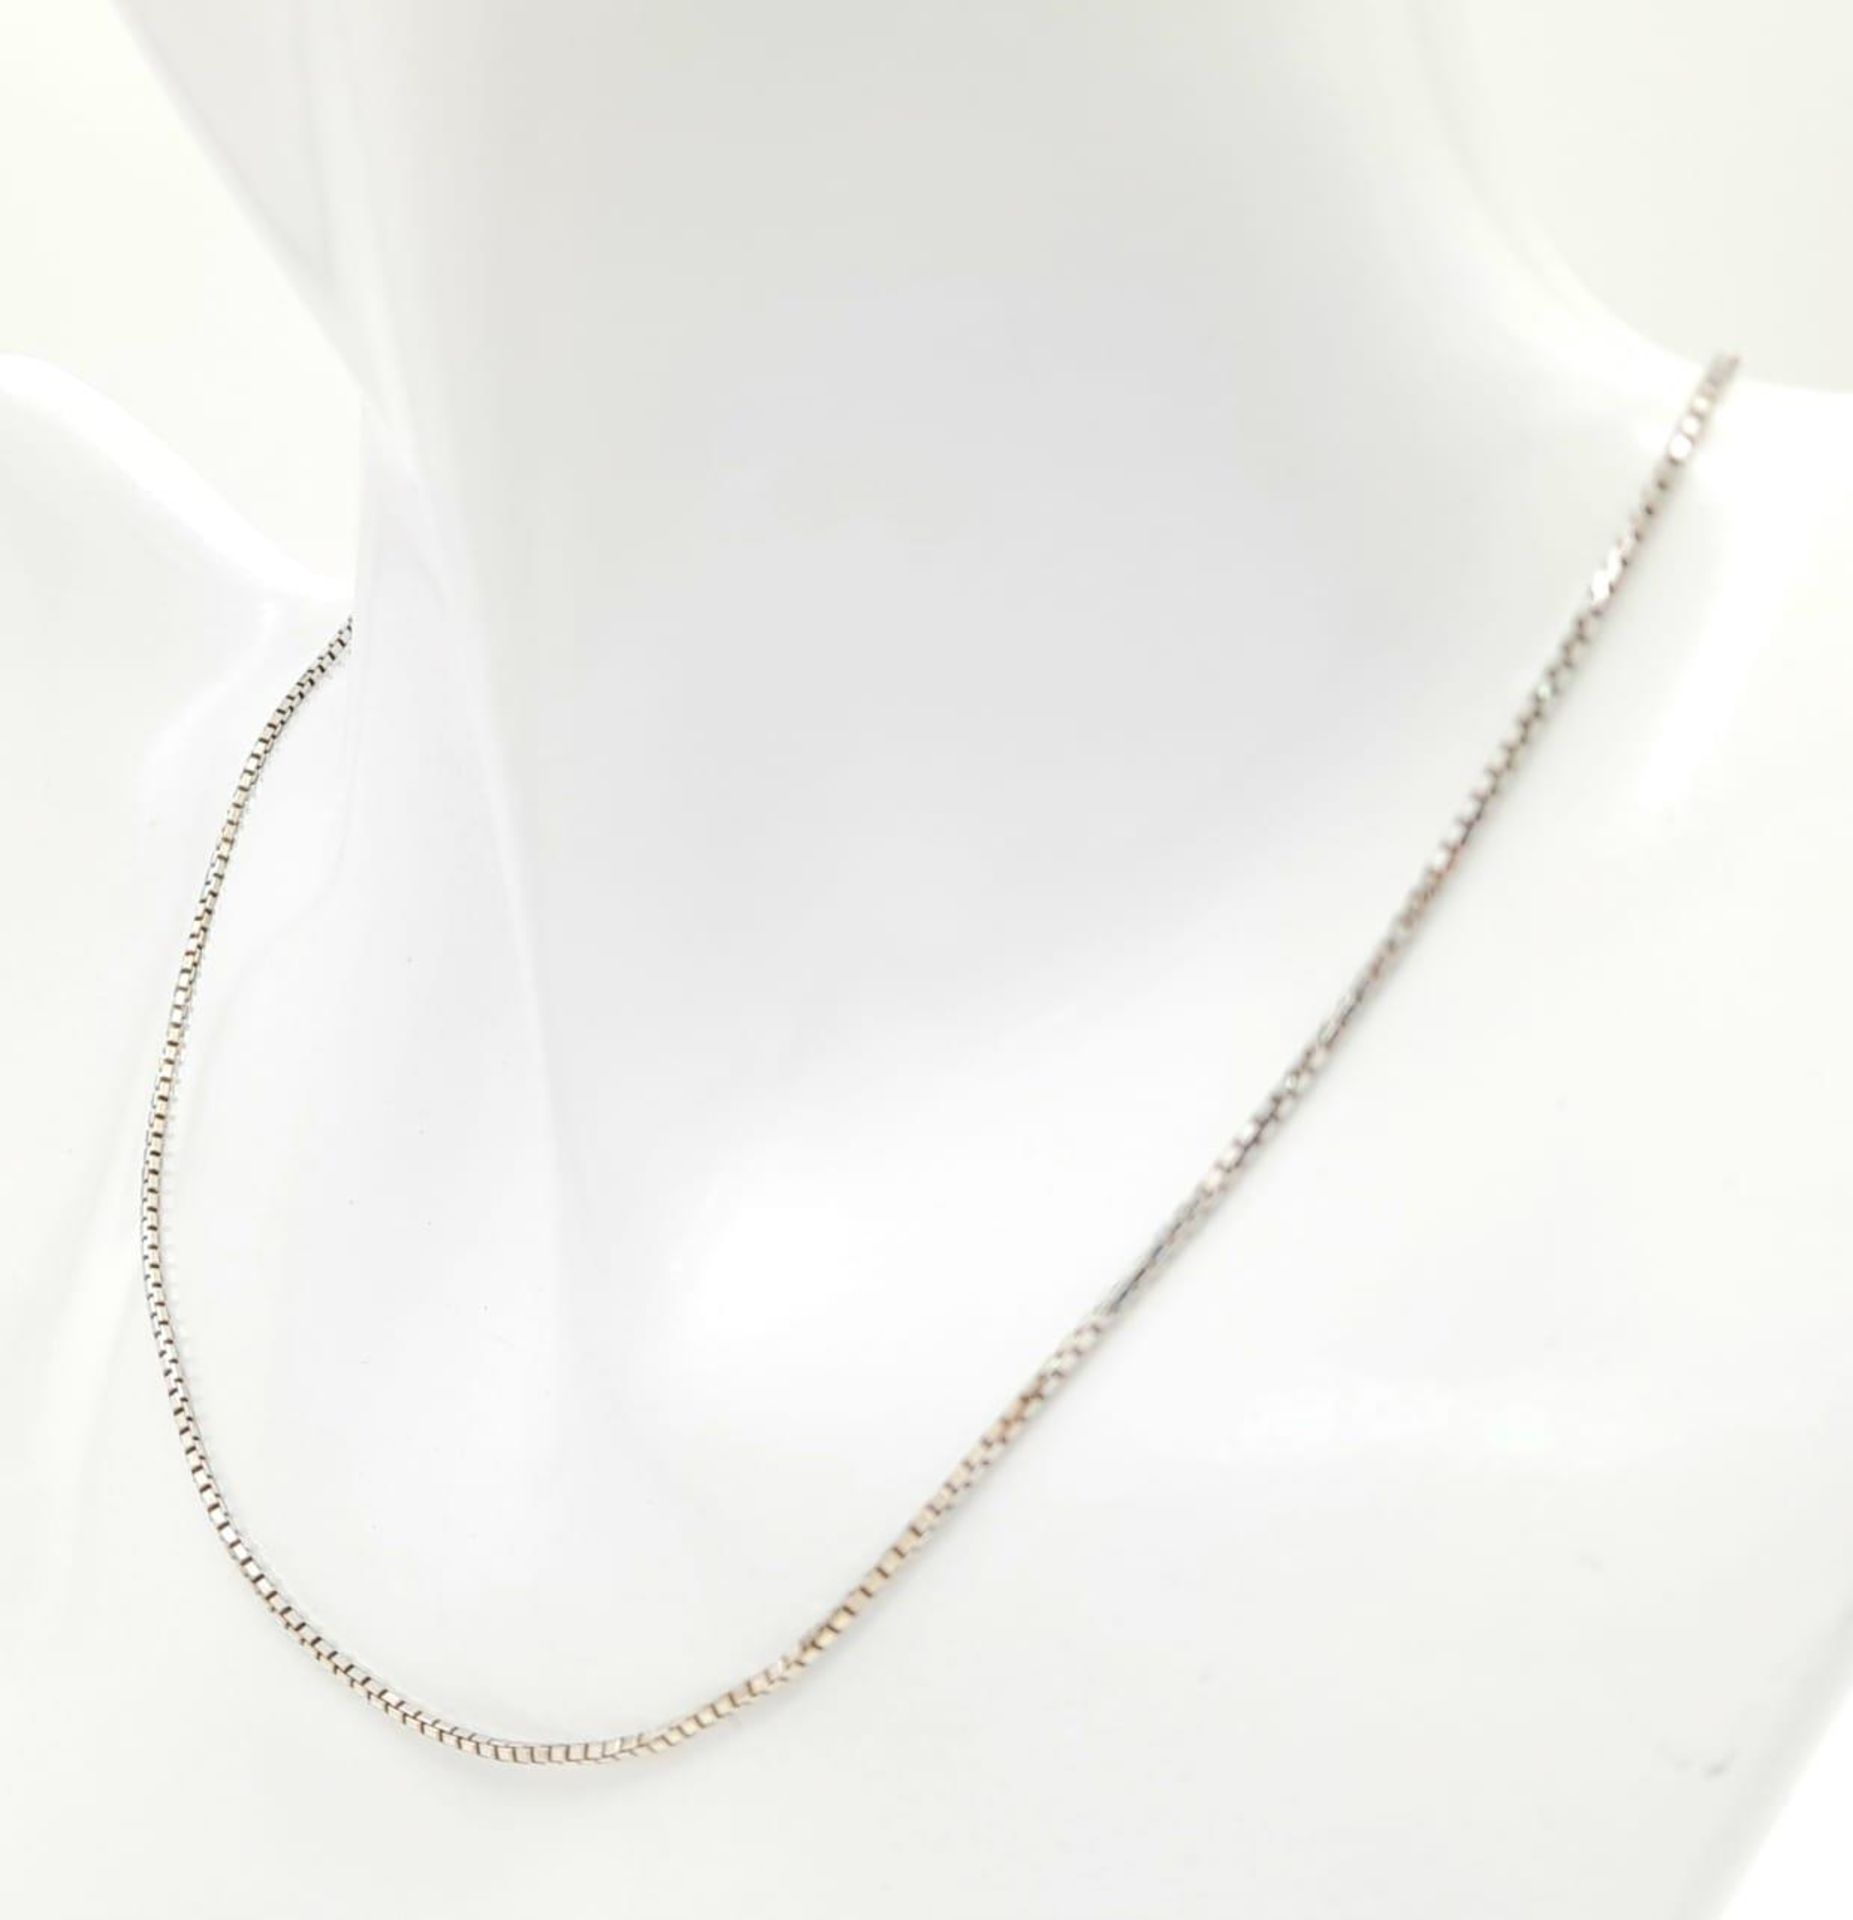 An 18K White Gold Link Necklace. Small rectangular links. 40cm. 4.56g weight. - Image 5 of 9